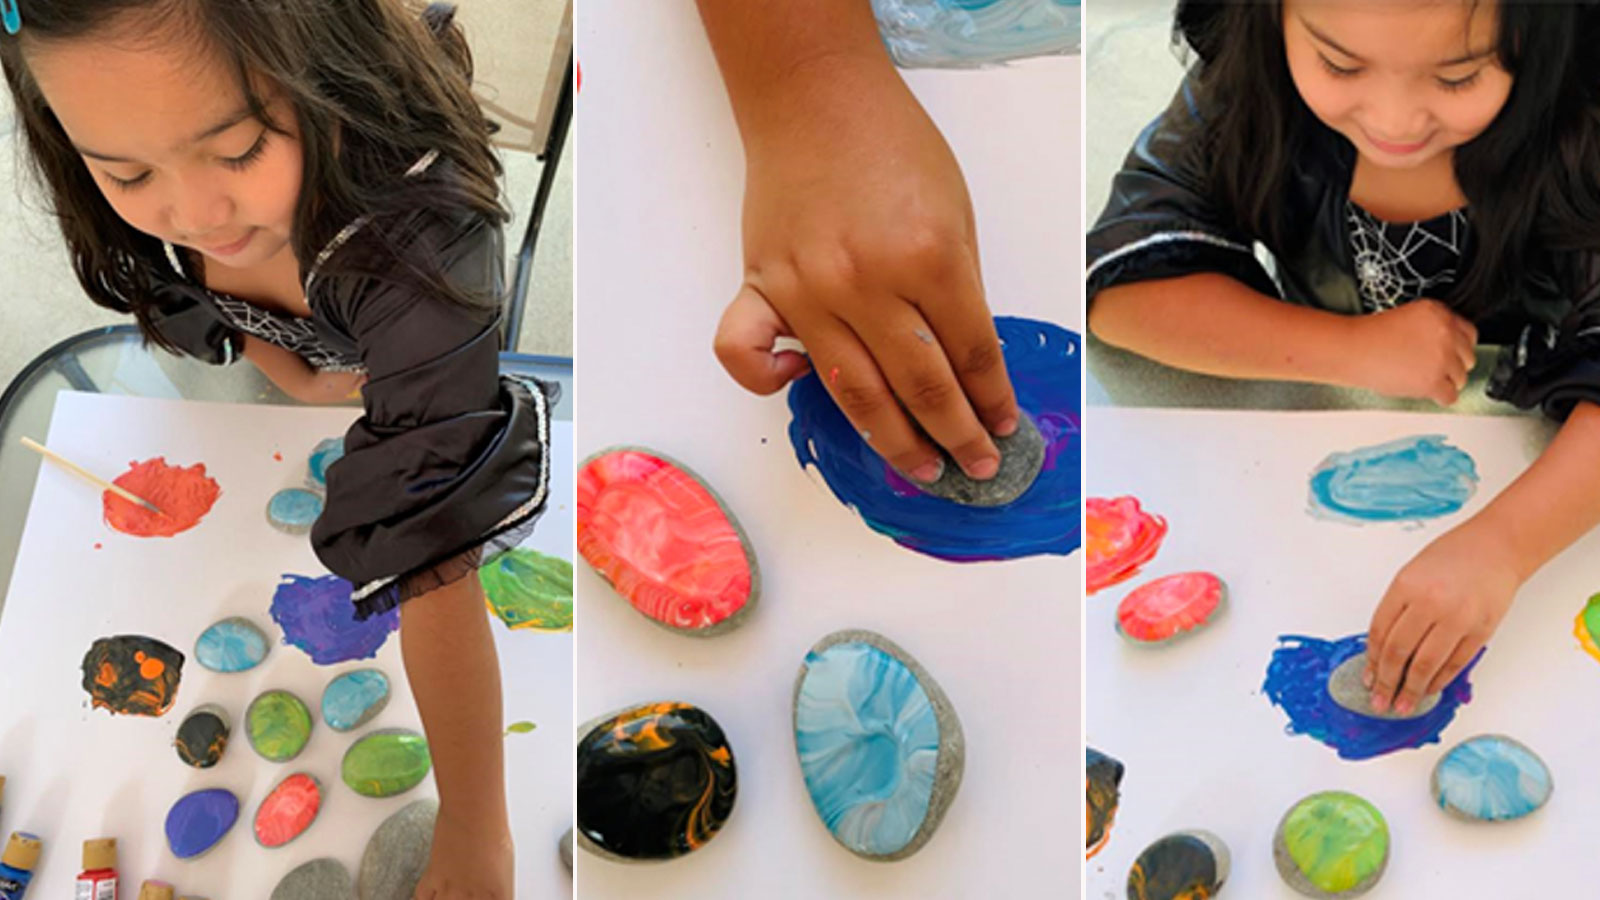 Three images showing a little girl painting rocks.